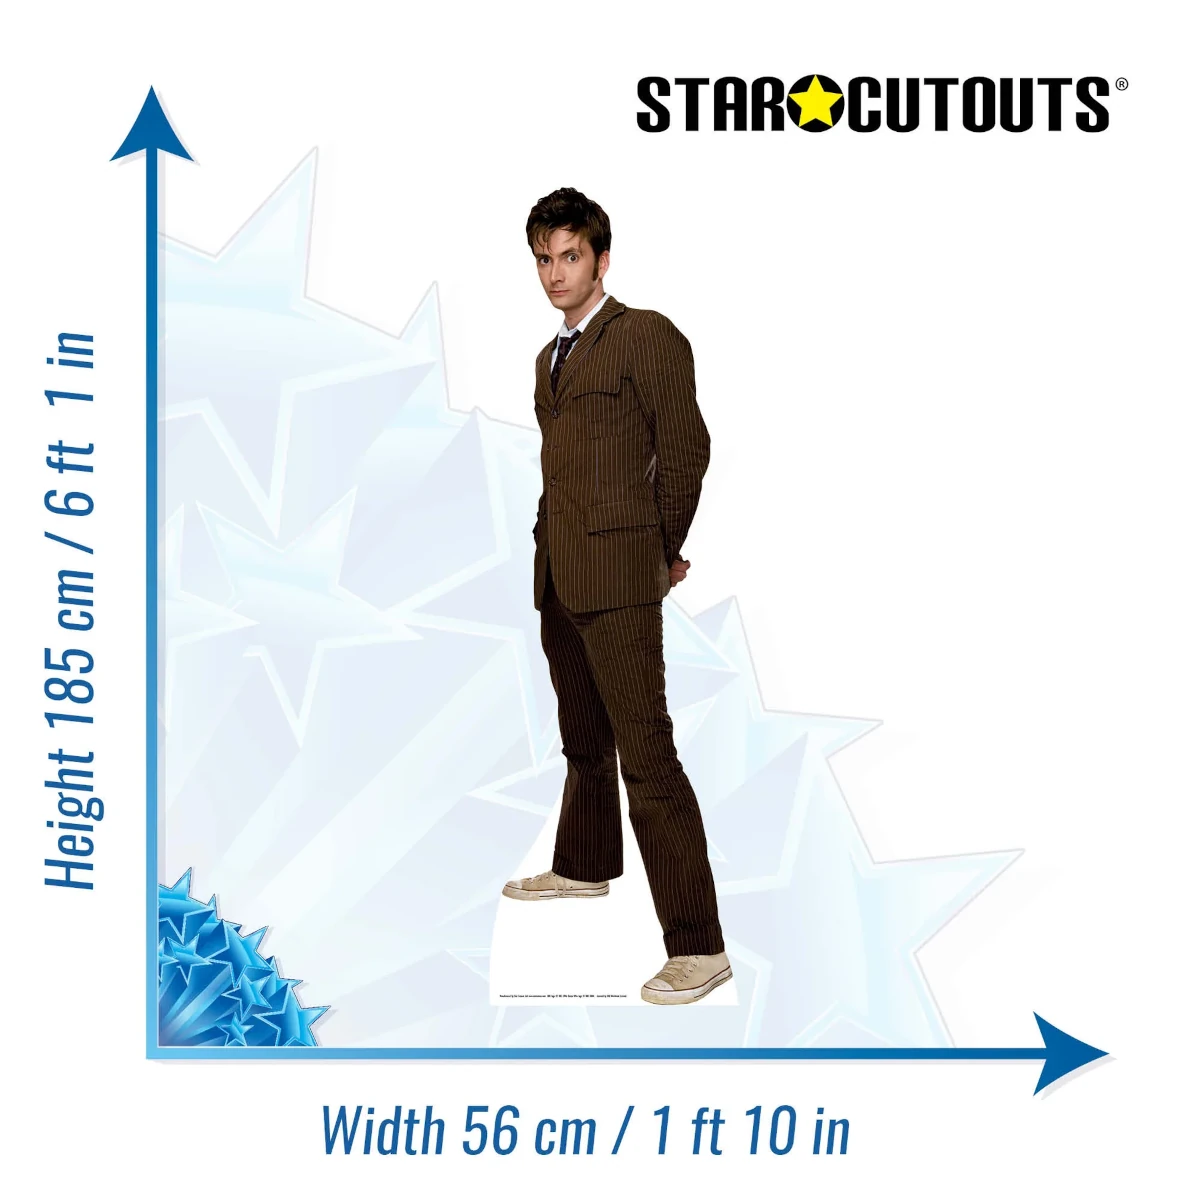 SC125 Tenth Doctor 'David Tennant' (Doctor Who) Official Lifesize Cardboard Cutout Standee Size